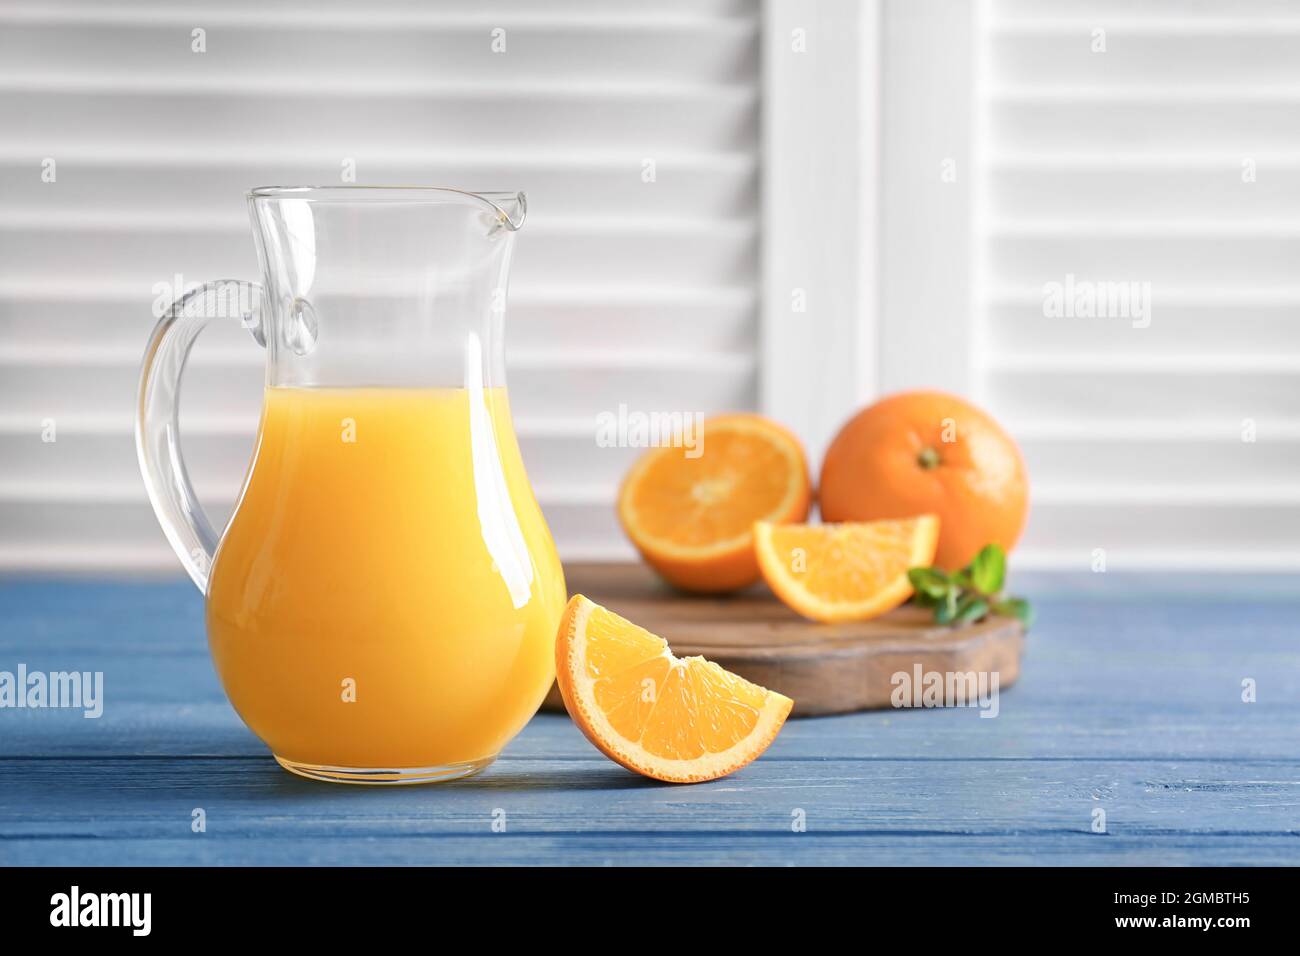 https://c8.alamy.com/comp/2GMBTH5/glass-jug-of-fresh-orange-juice-with-slice-on-wooden-table-2GMBTH5.jpg